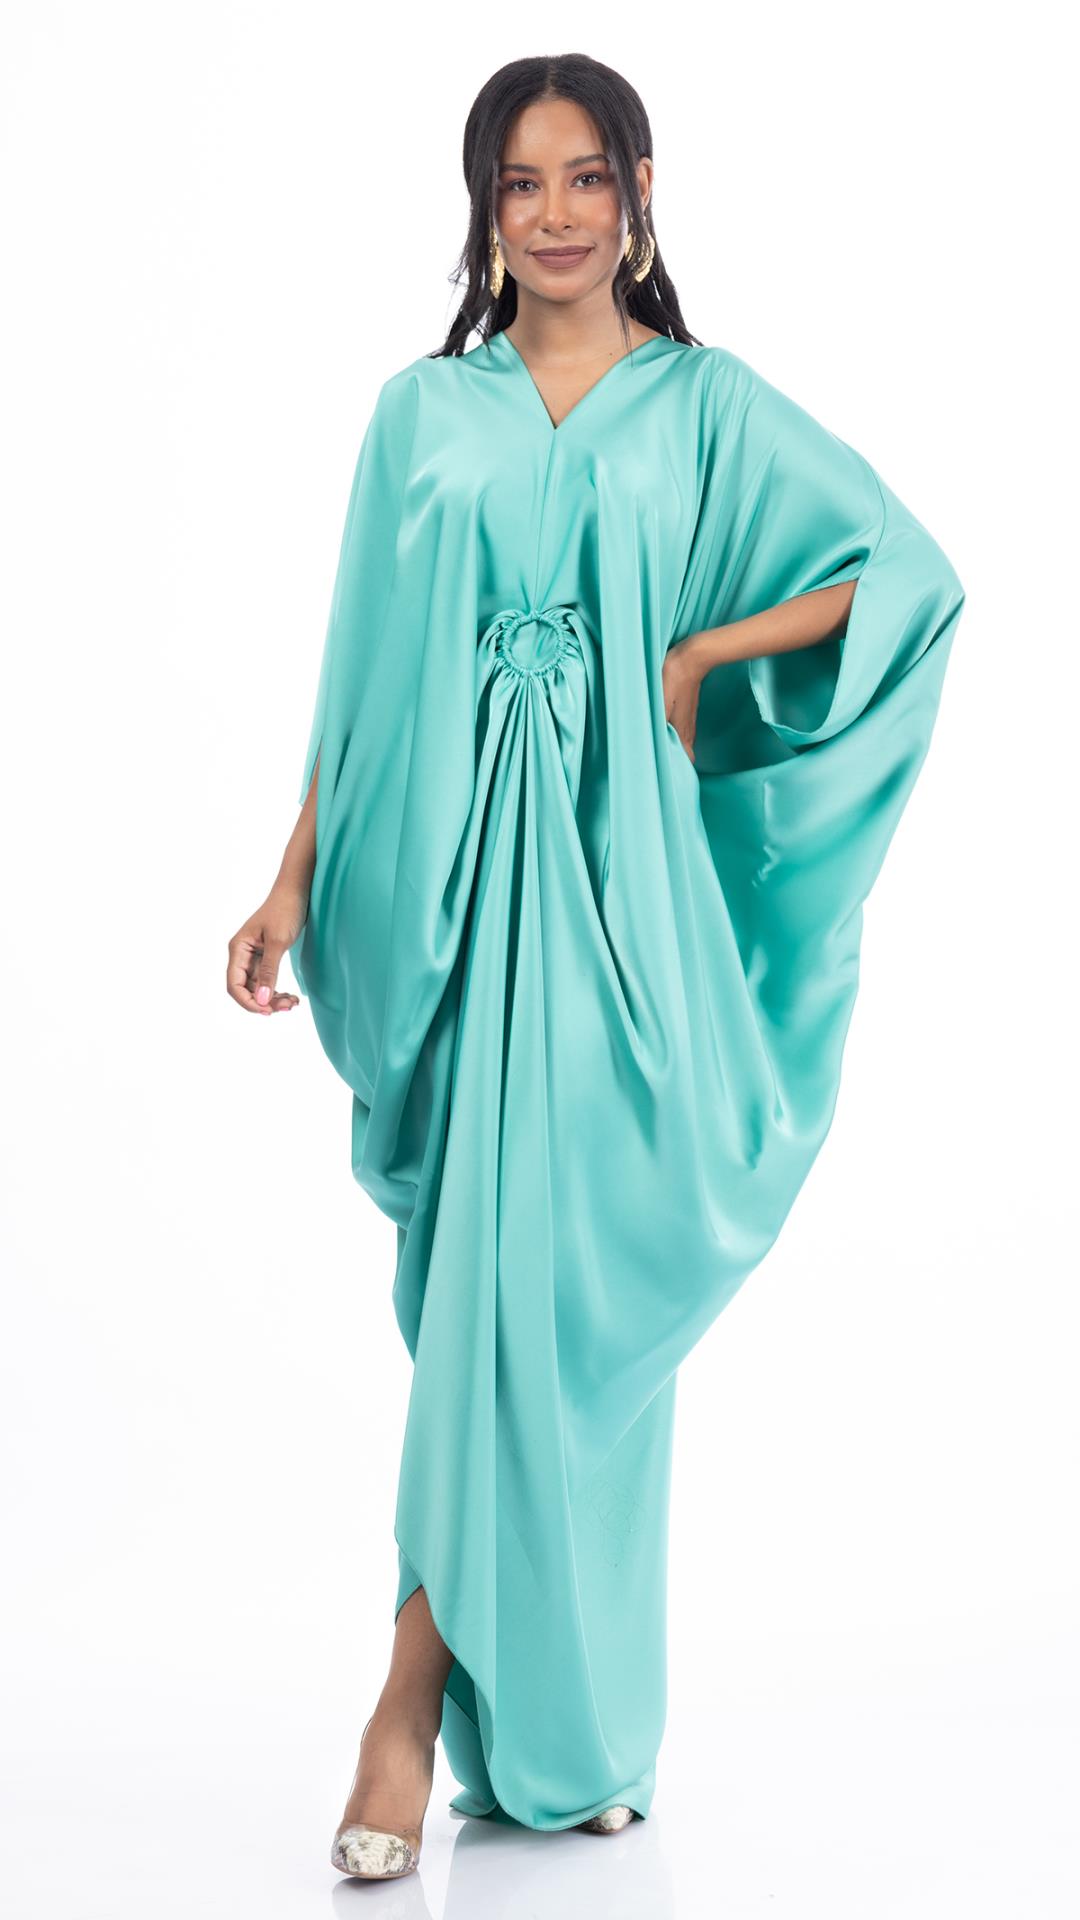 Abaya satin with distinctive design in the middle